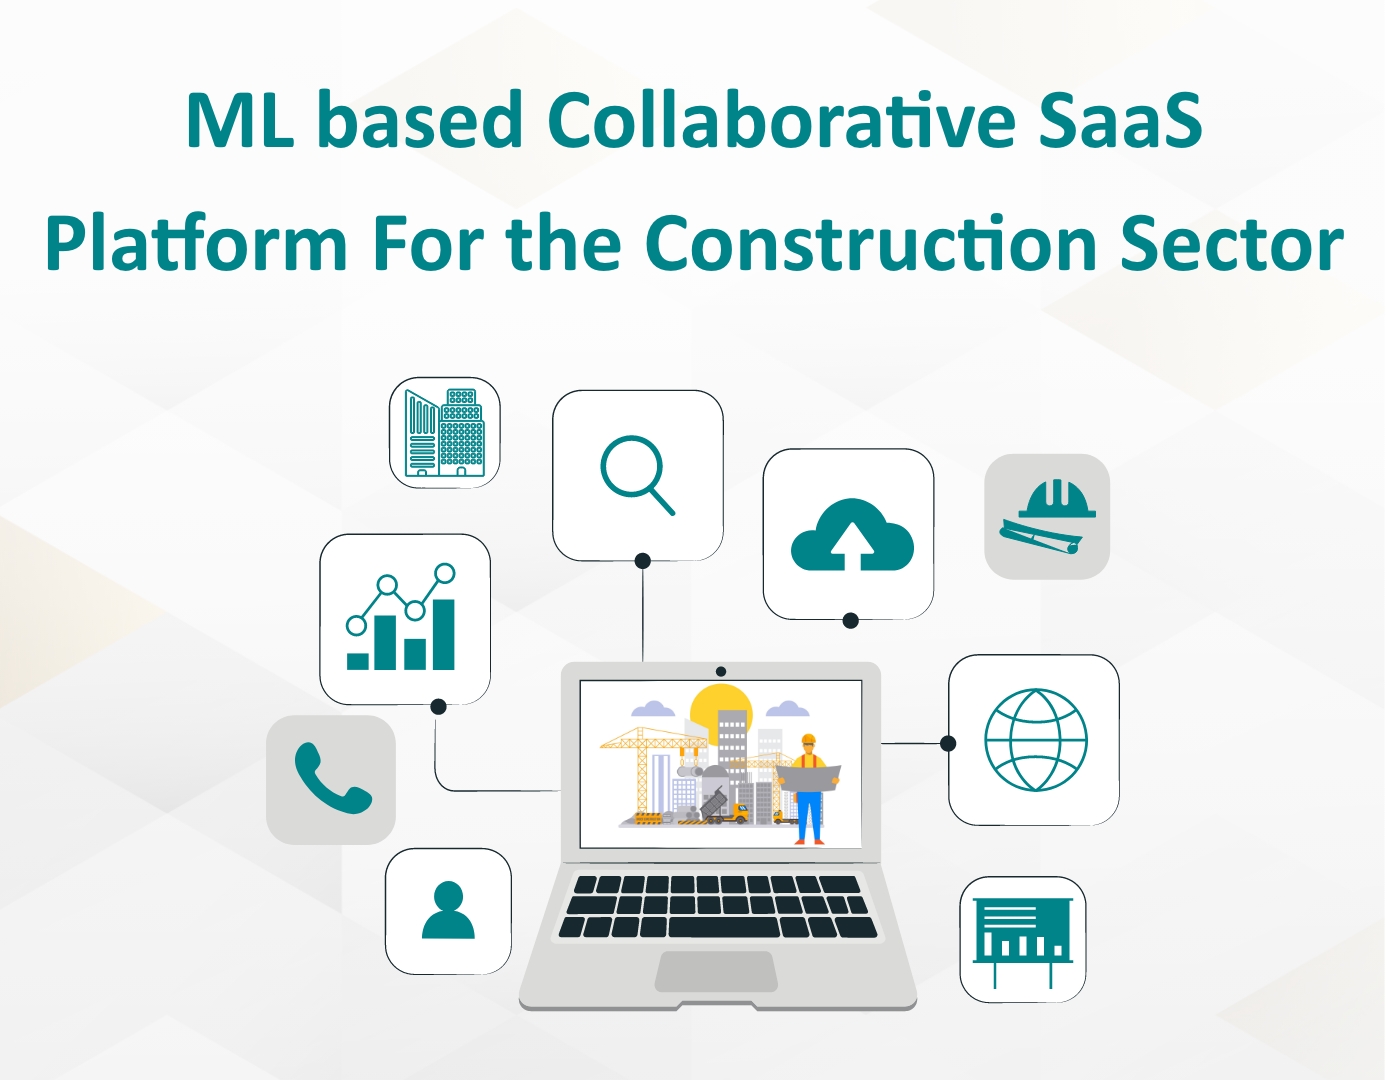 ML based collaborative SaaS platform for the construction sector